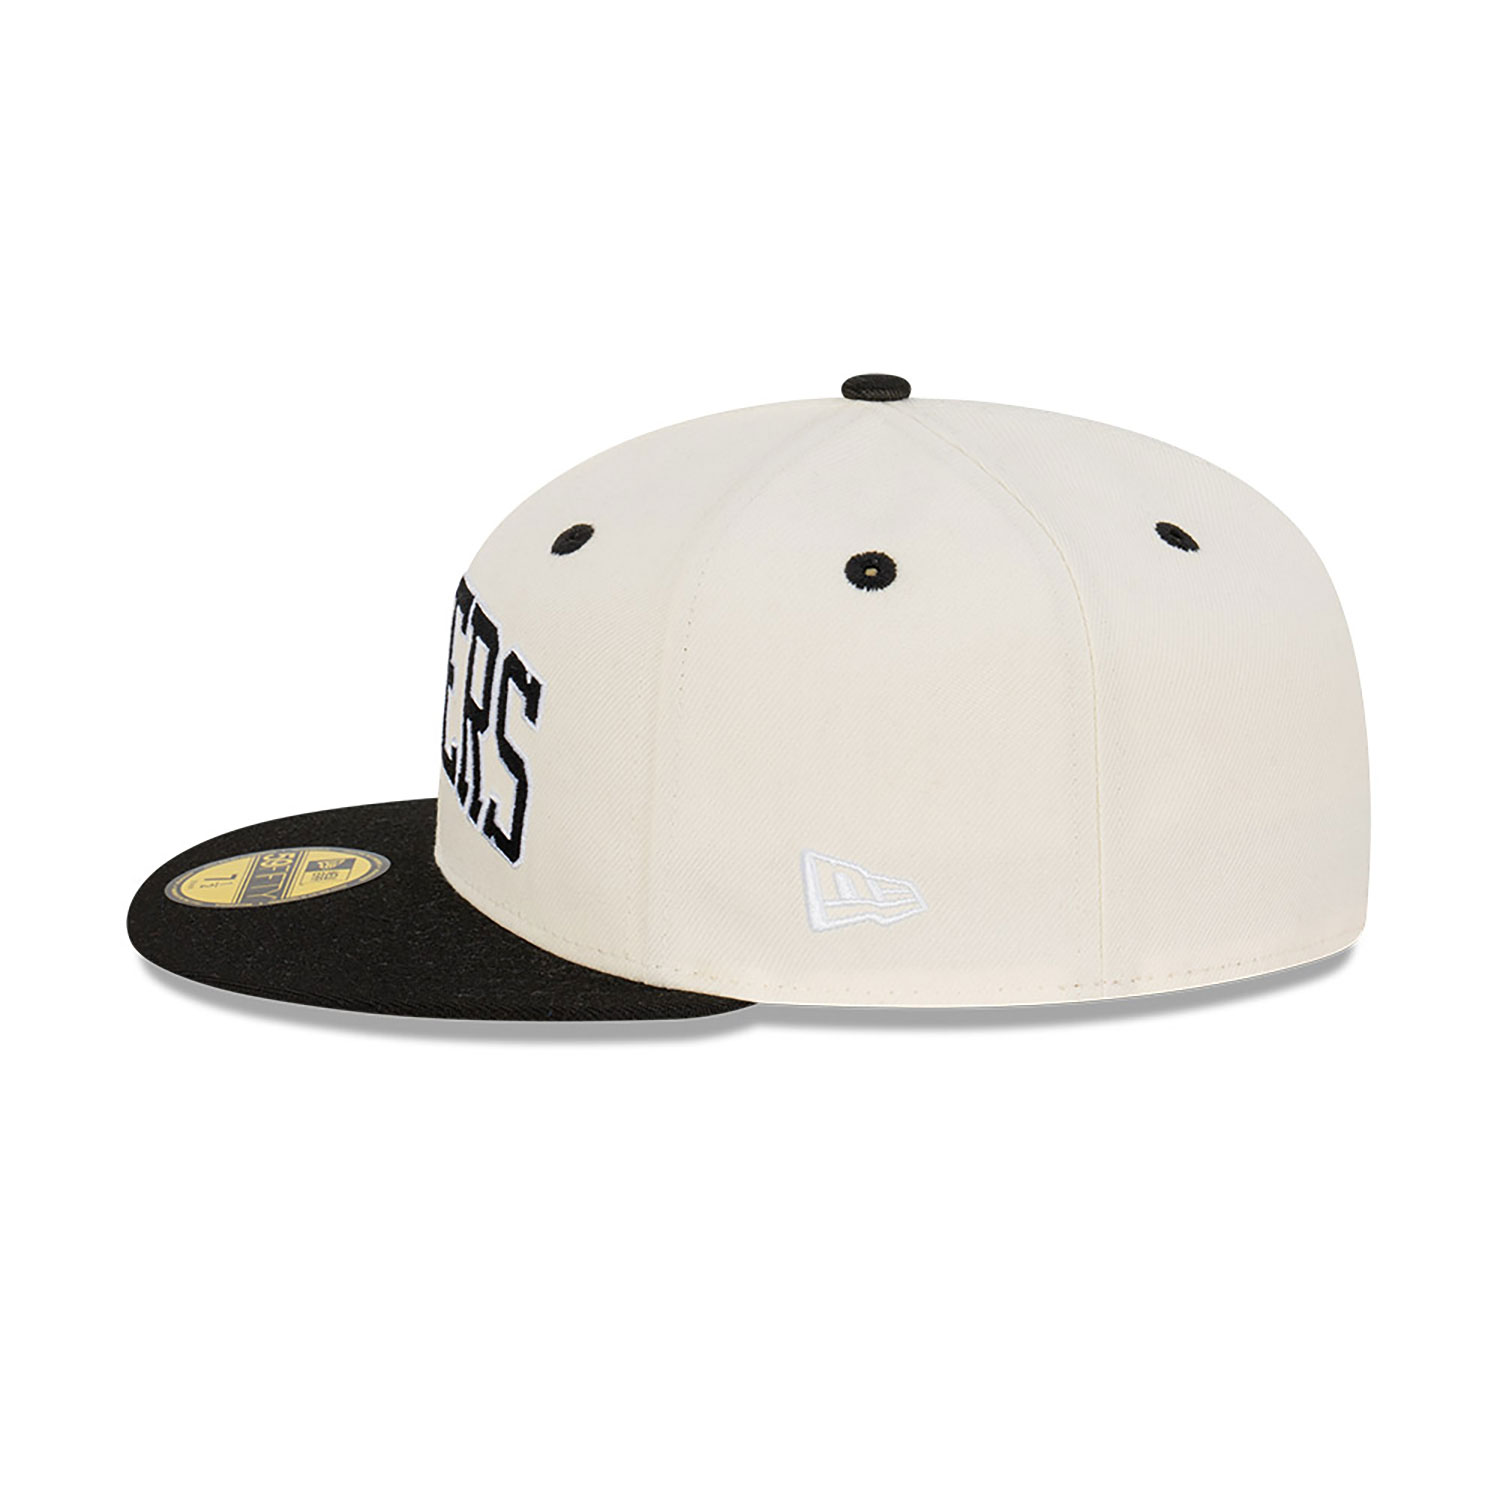 Las Vegas Raiders Pack Chrome White 59FIFTY Fitted Cap